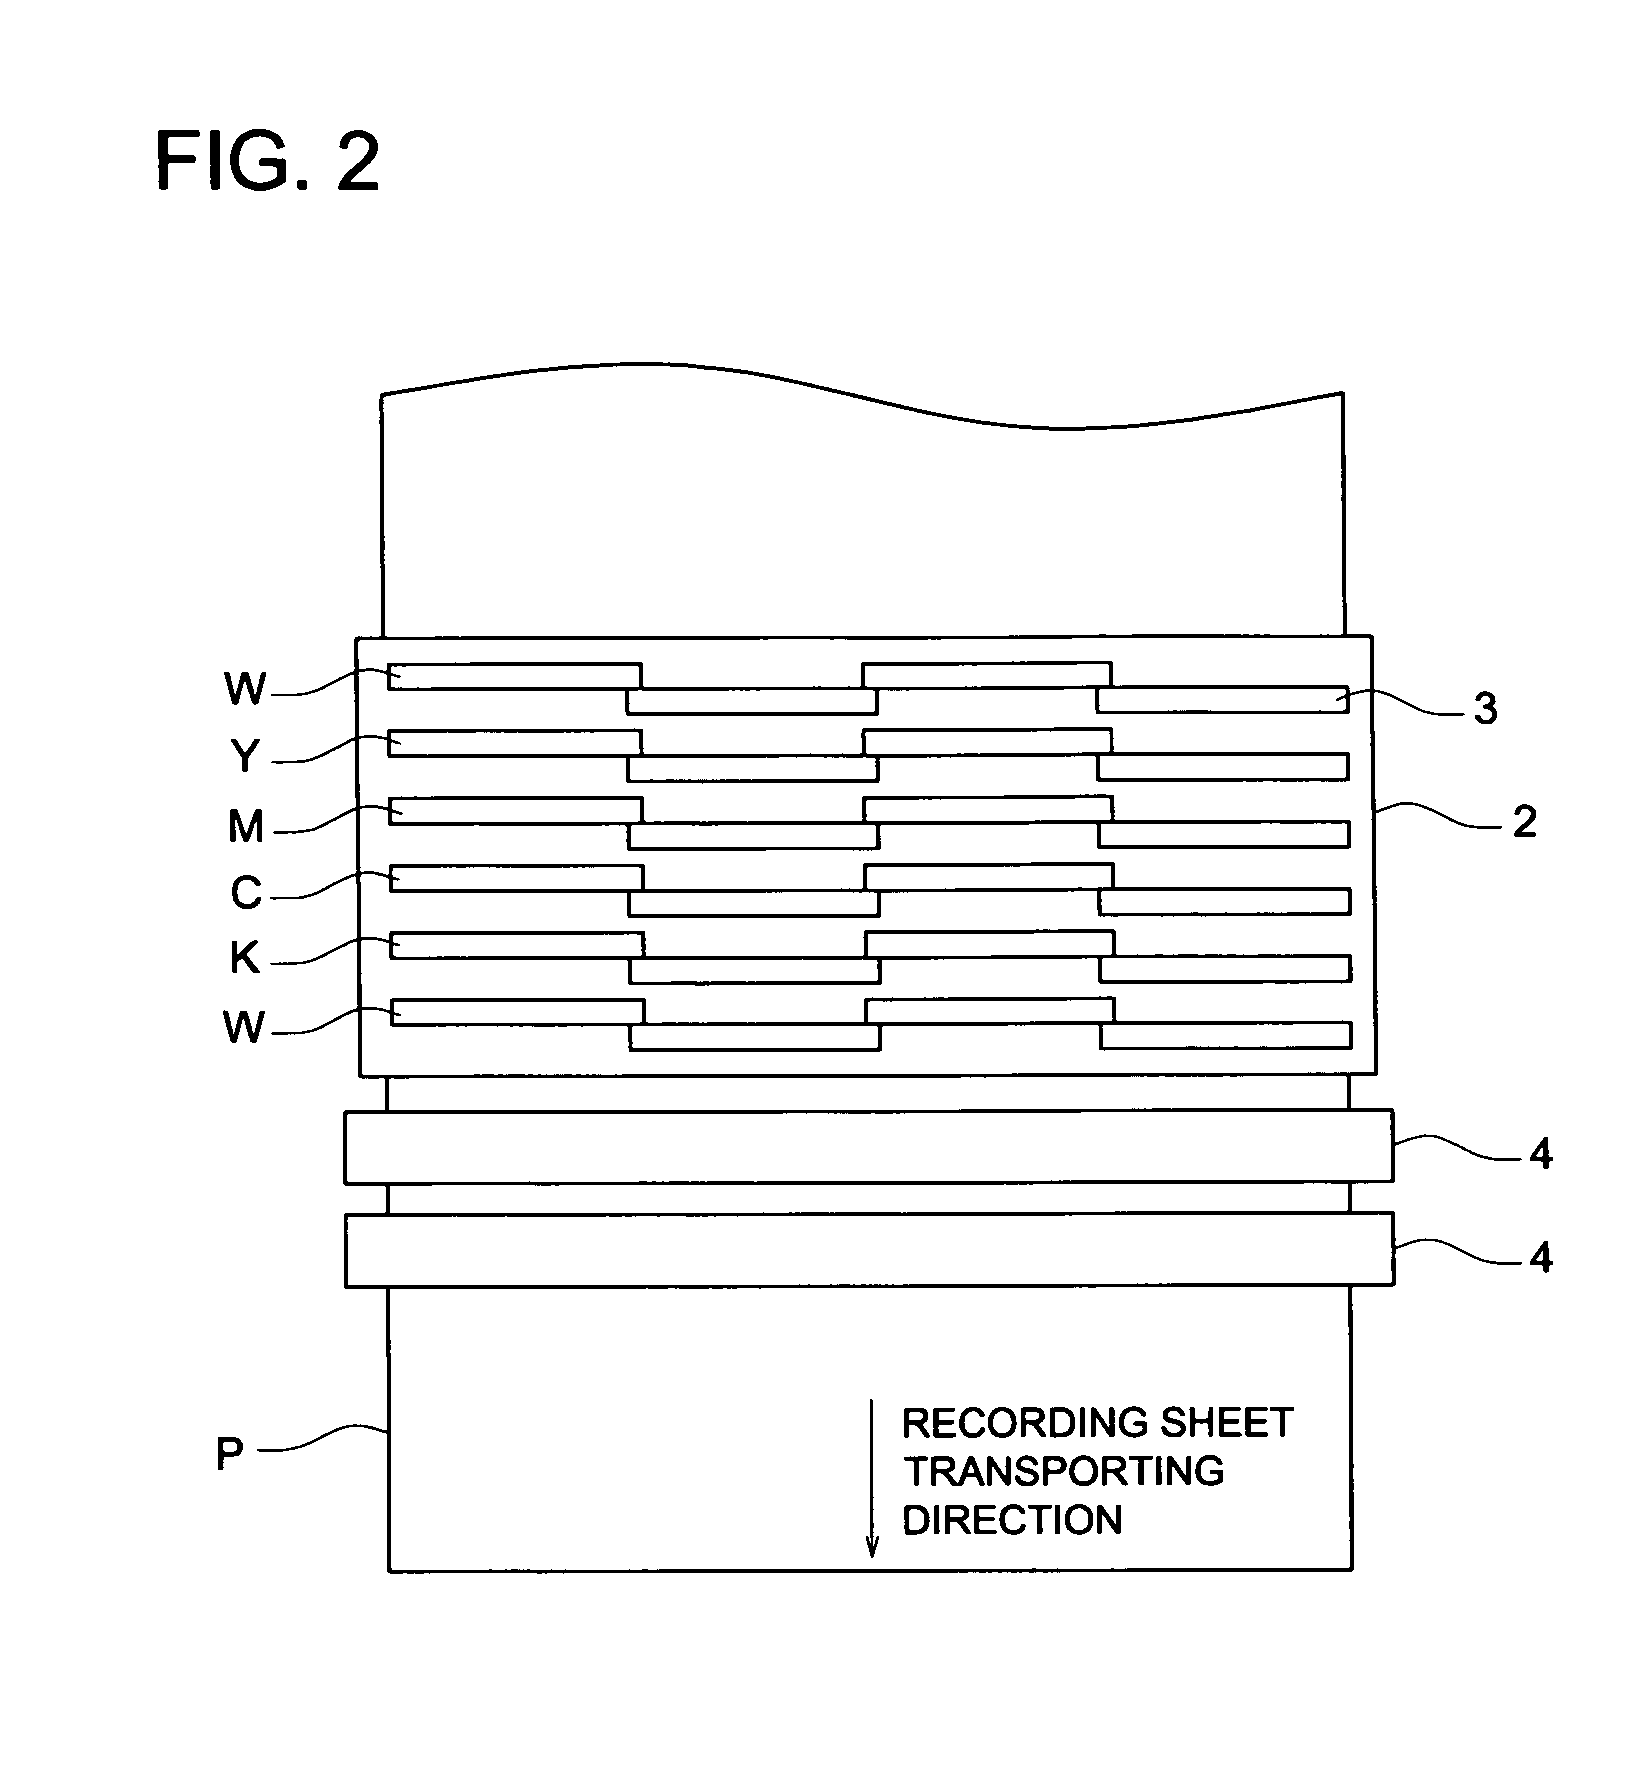 Actinic Radiation Curable Inkjet Ink, Method for Storing the Actinic Radiation Curable Inkjet Ink, Image Forming Method, and Inkjet Recording Apparatus